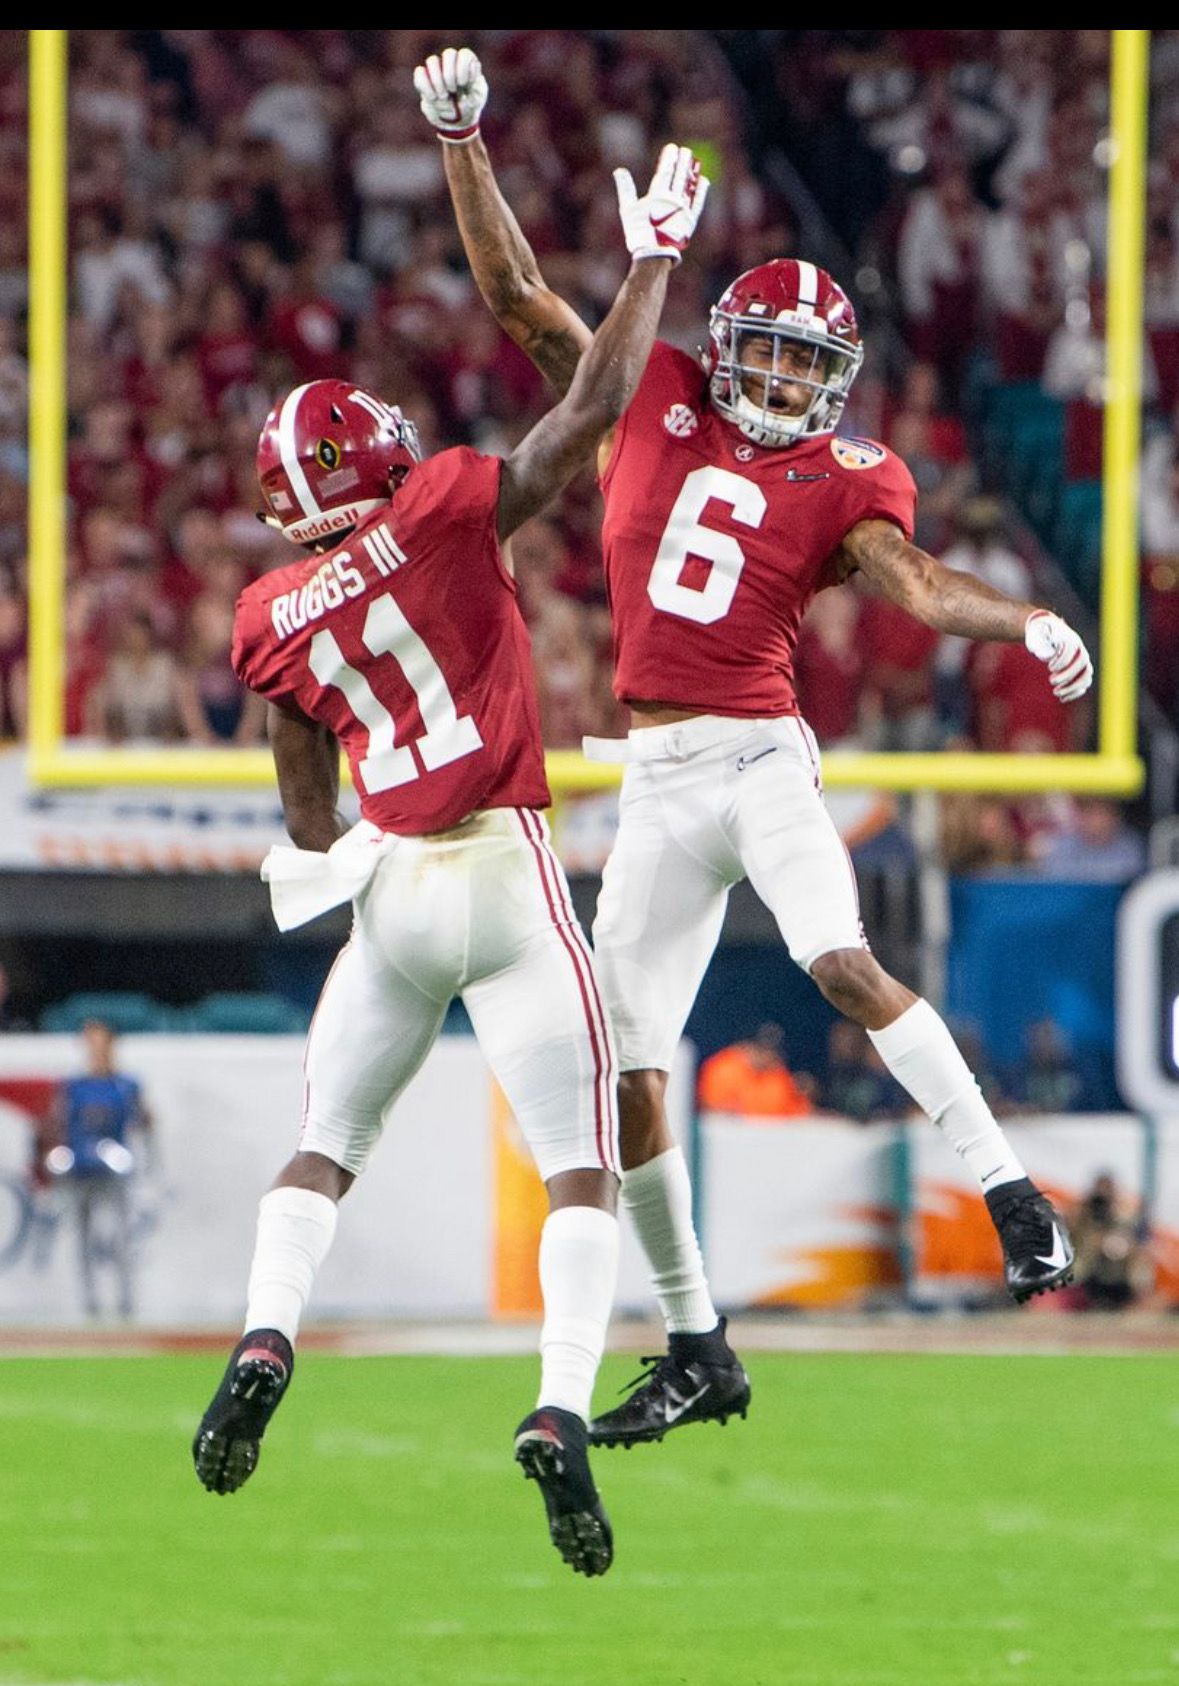 Alabama wide receivers Henry Ruggs, III, (11) and DeVonta Smith (6) celebrate Ruggs' touchdown catch in. Alabama crimson tide football, Alabama football, Alabama